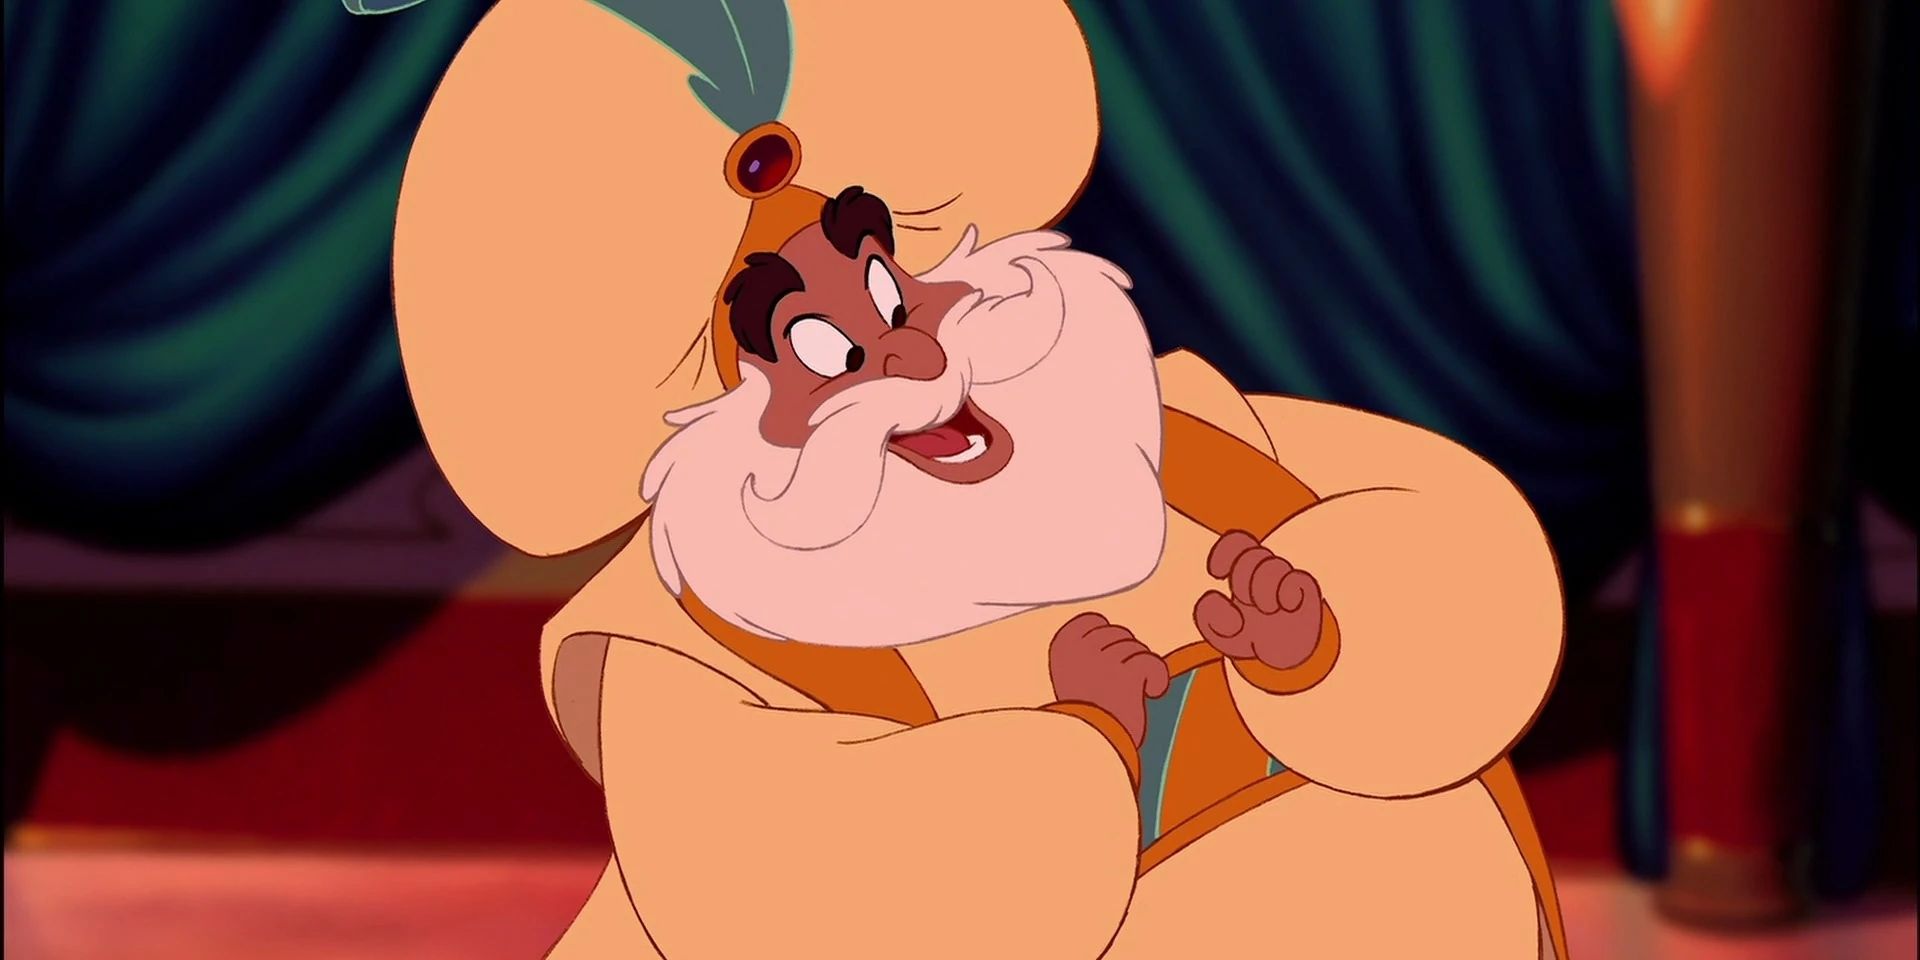 The smiling Sultan from Disney's Aladdin